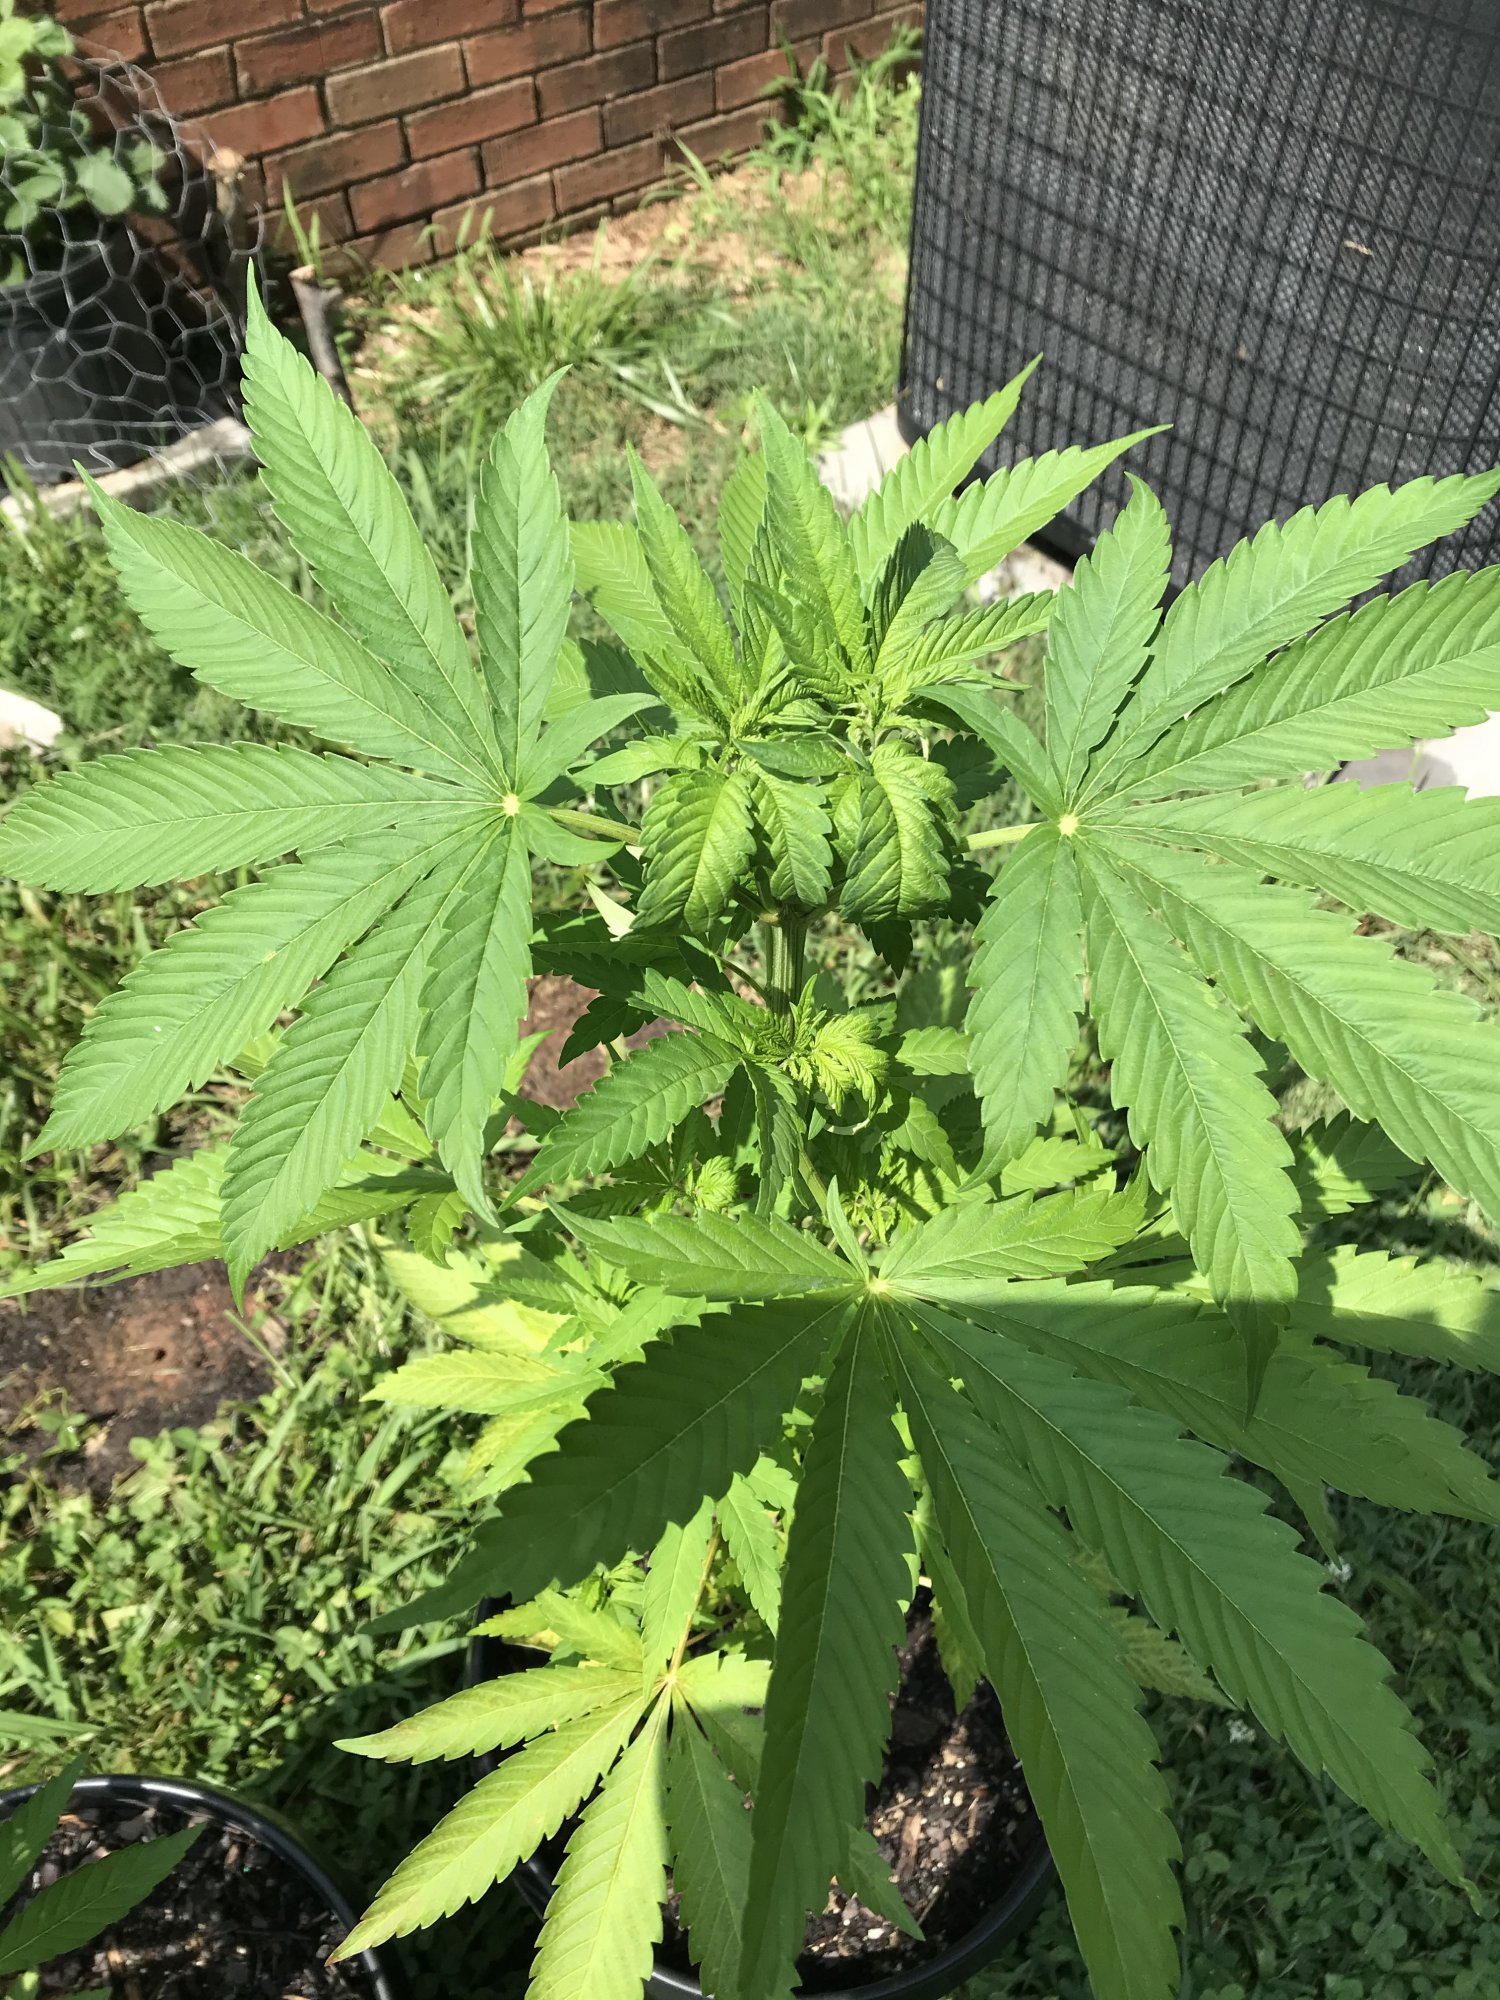 Help a young grower understand 2